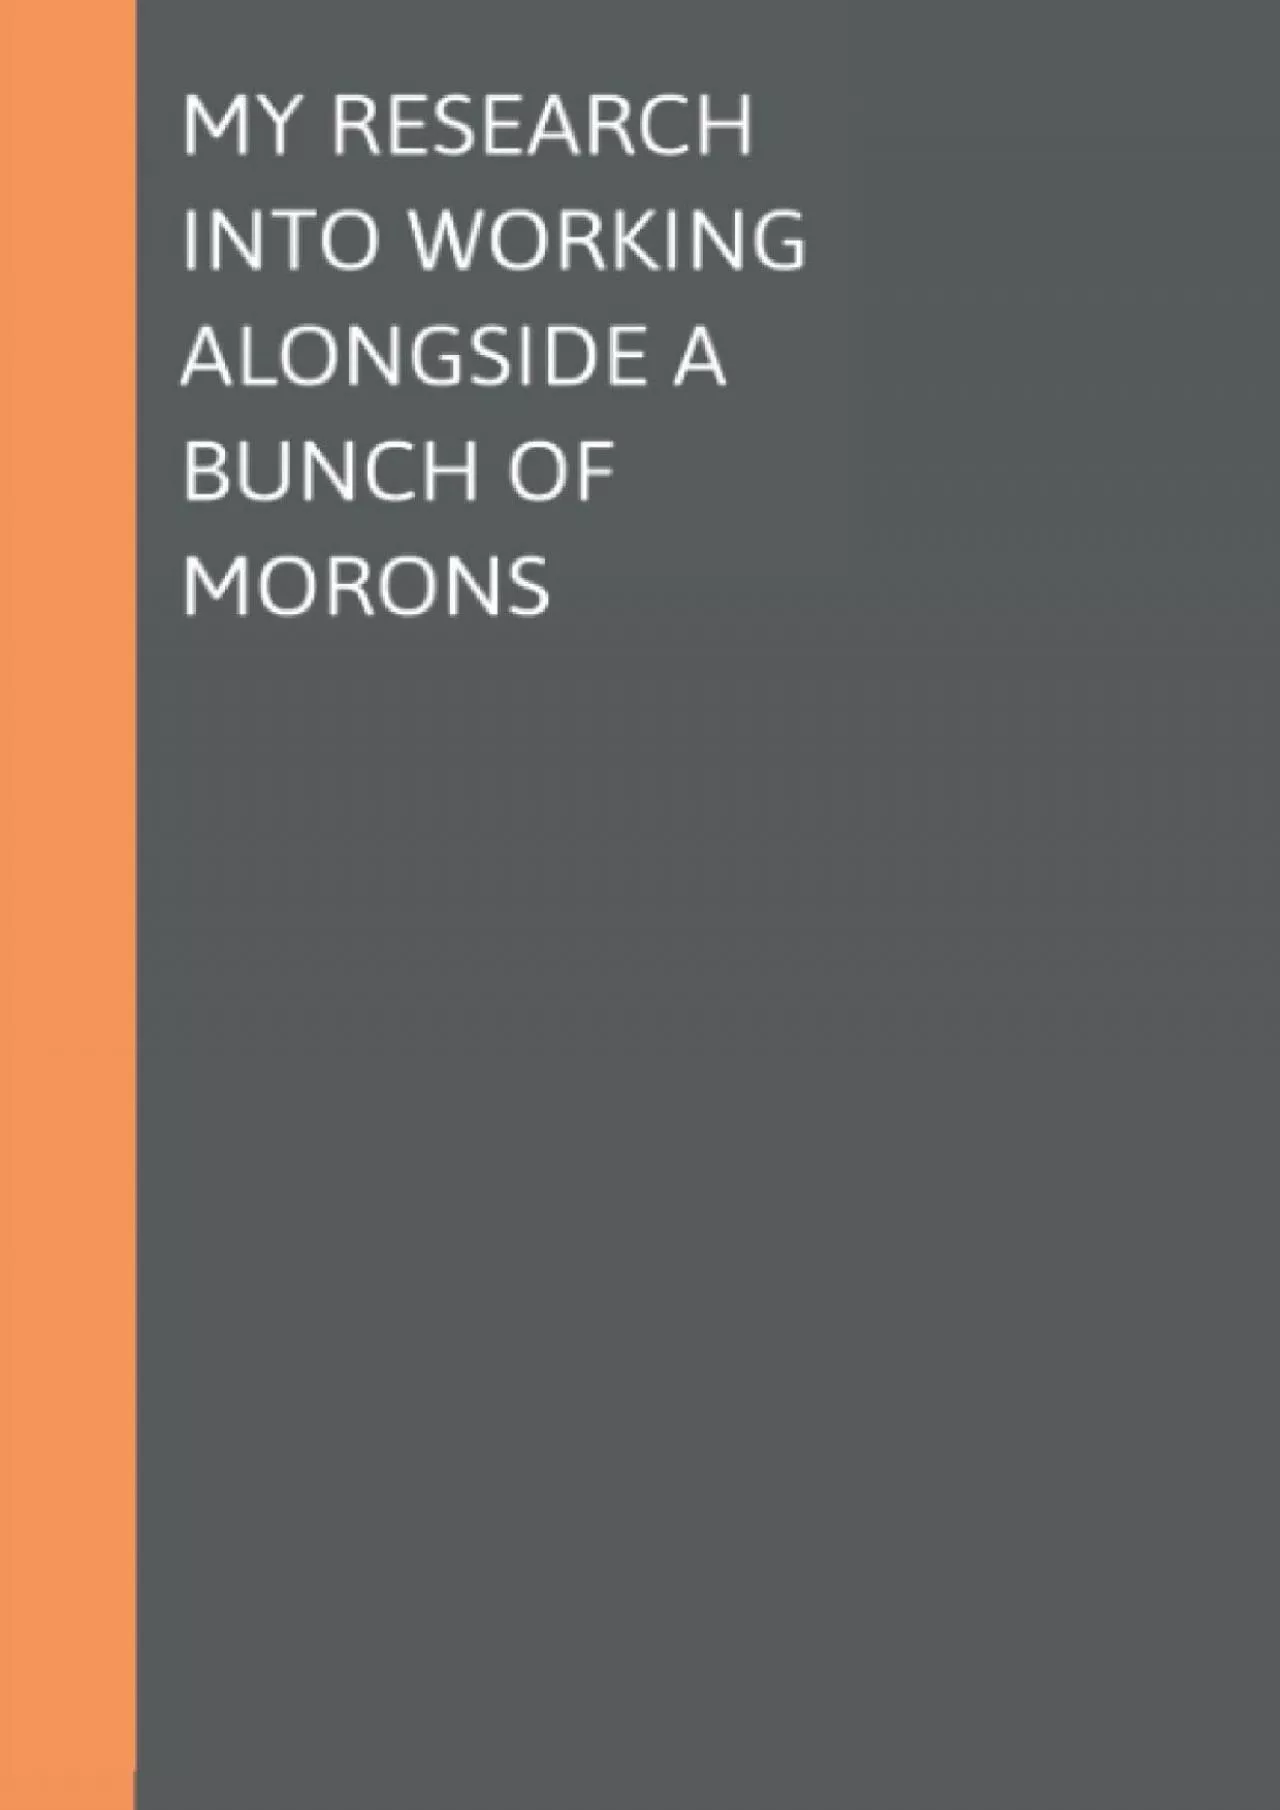 (EBOOK)-My Research Into Working Alongside A Bunch Of Morons: Blank Lined Journal, Coworker